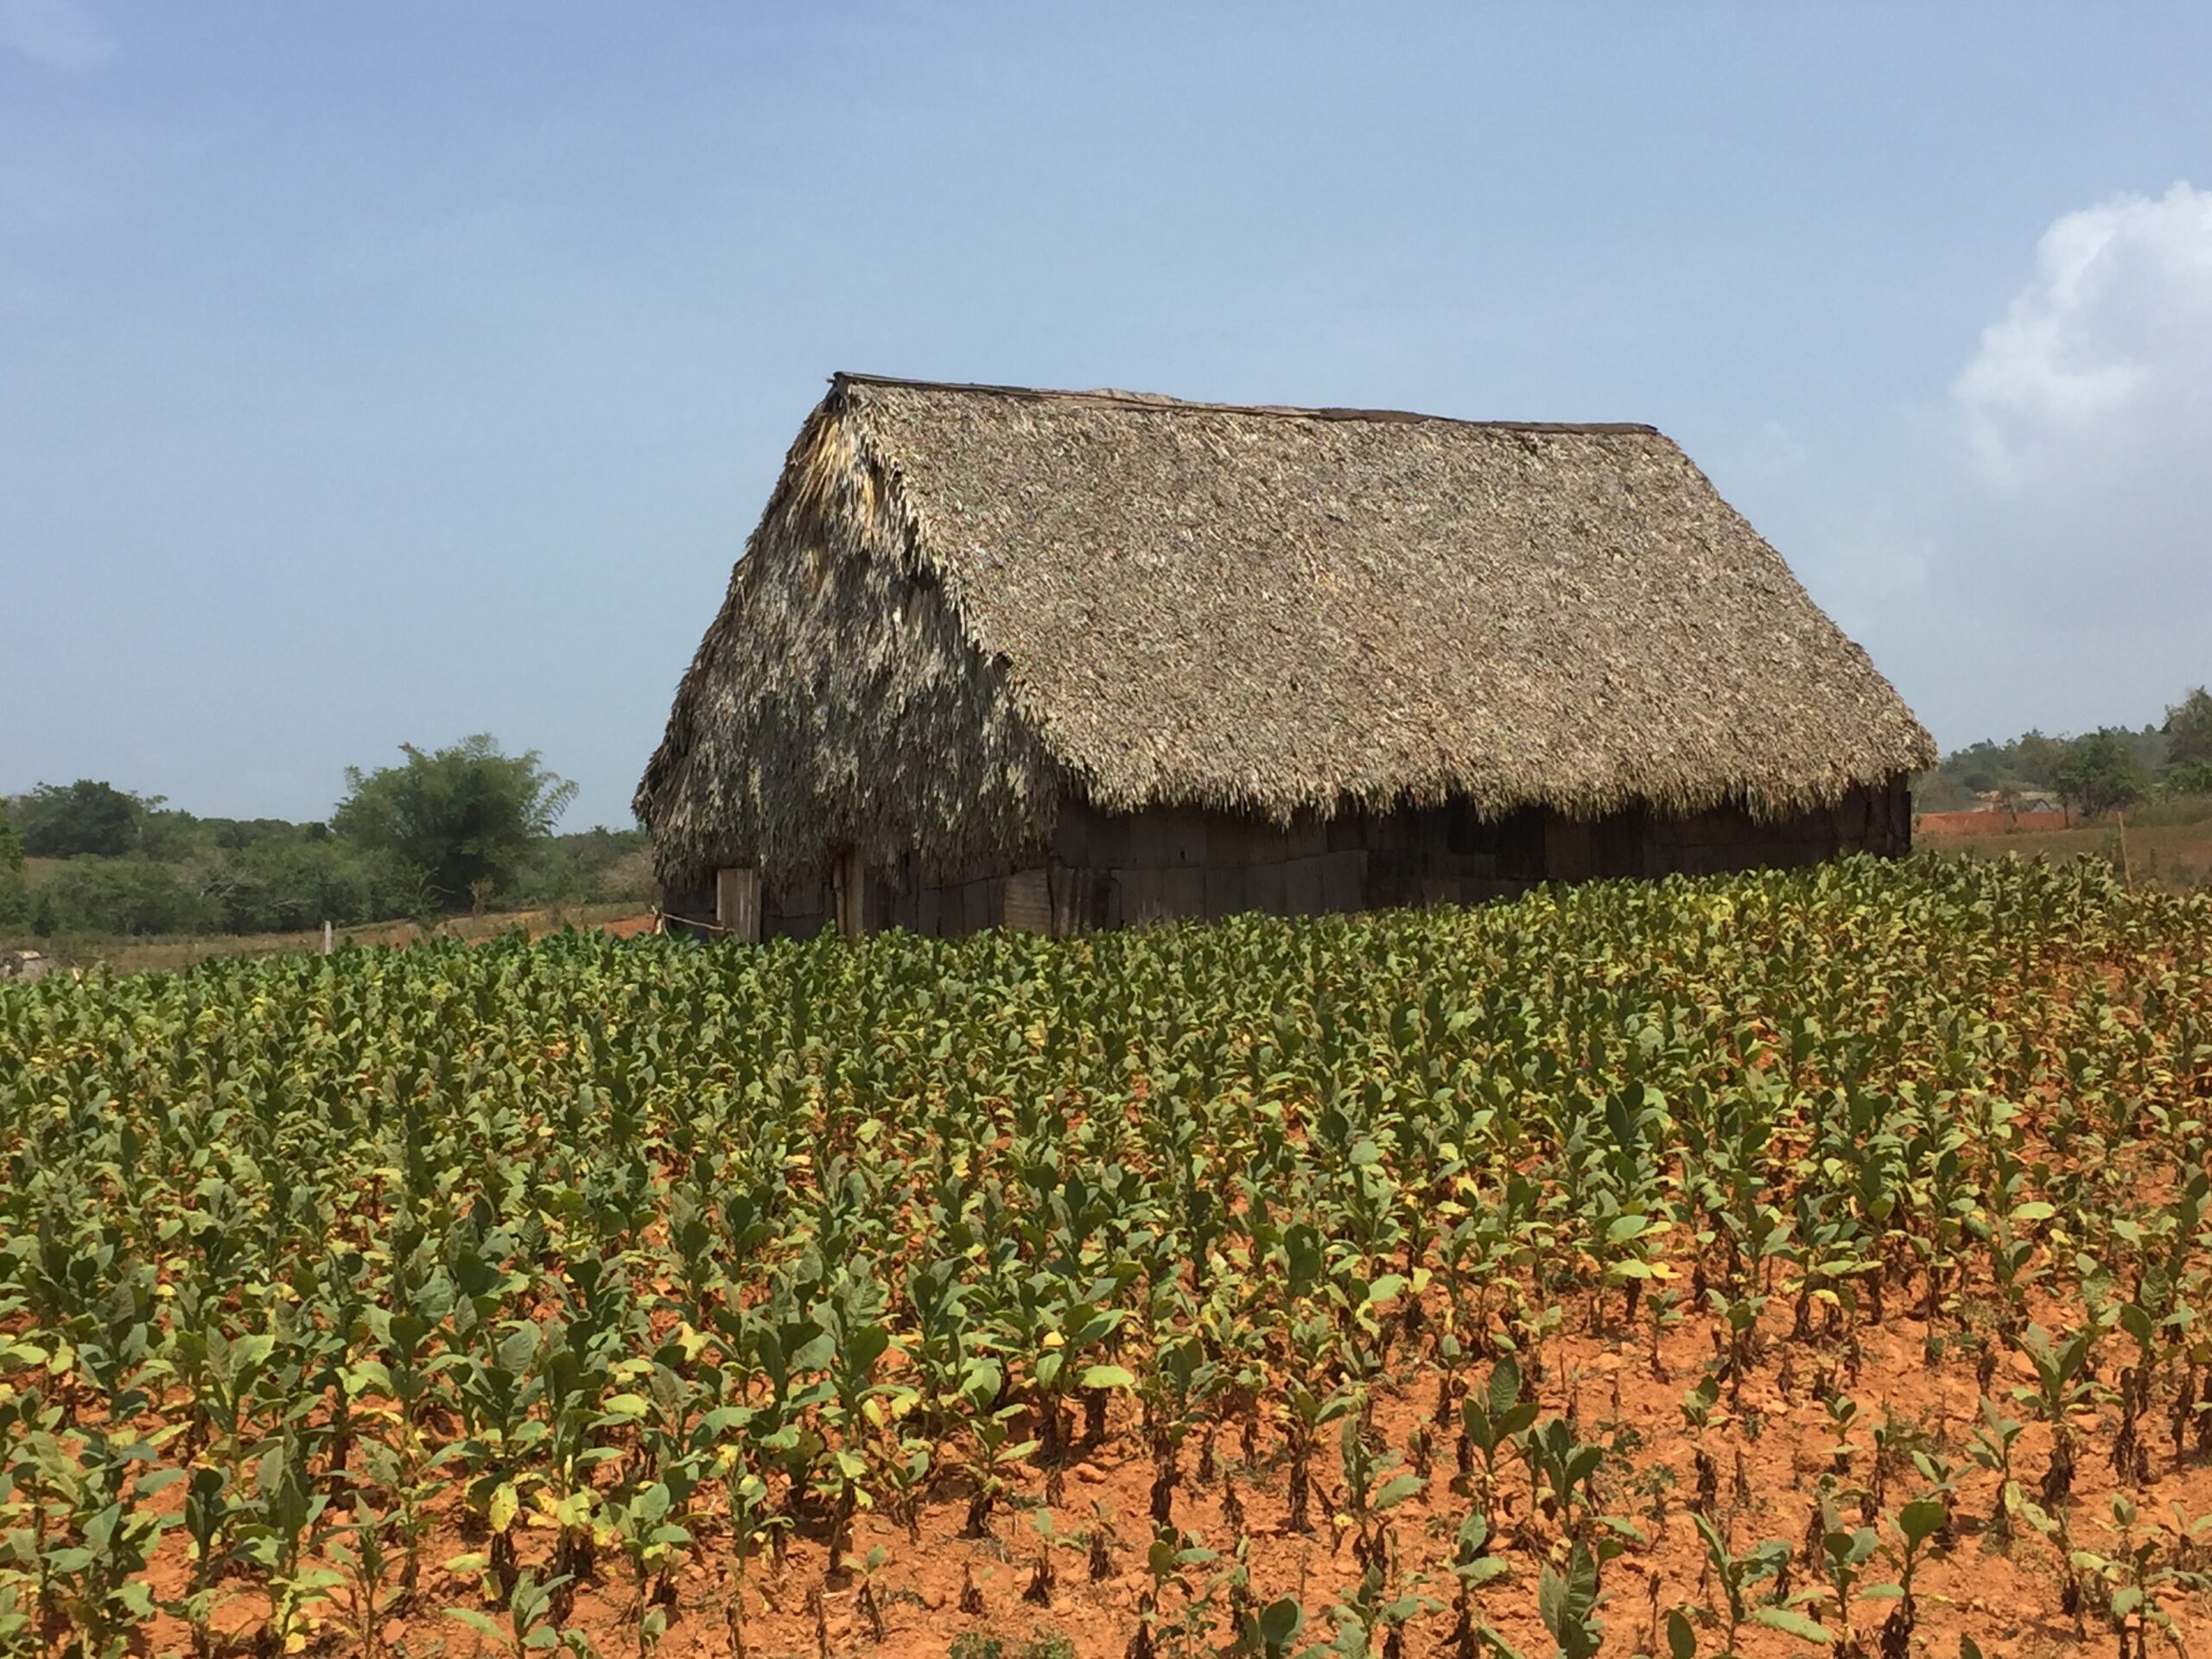 House in a tobacco field